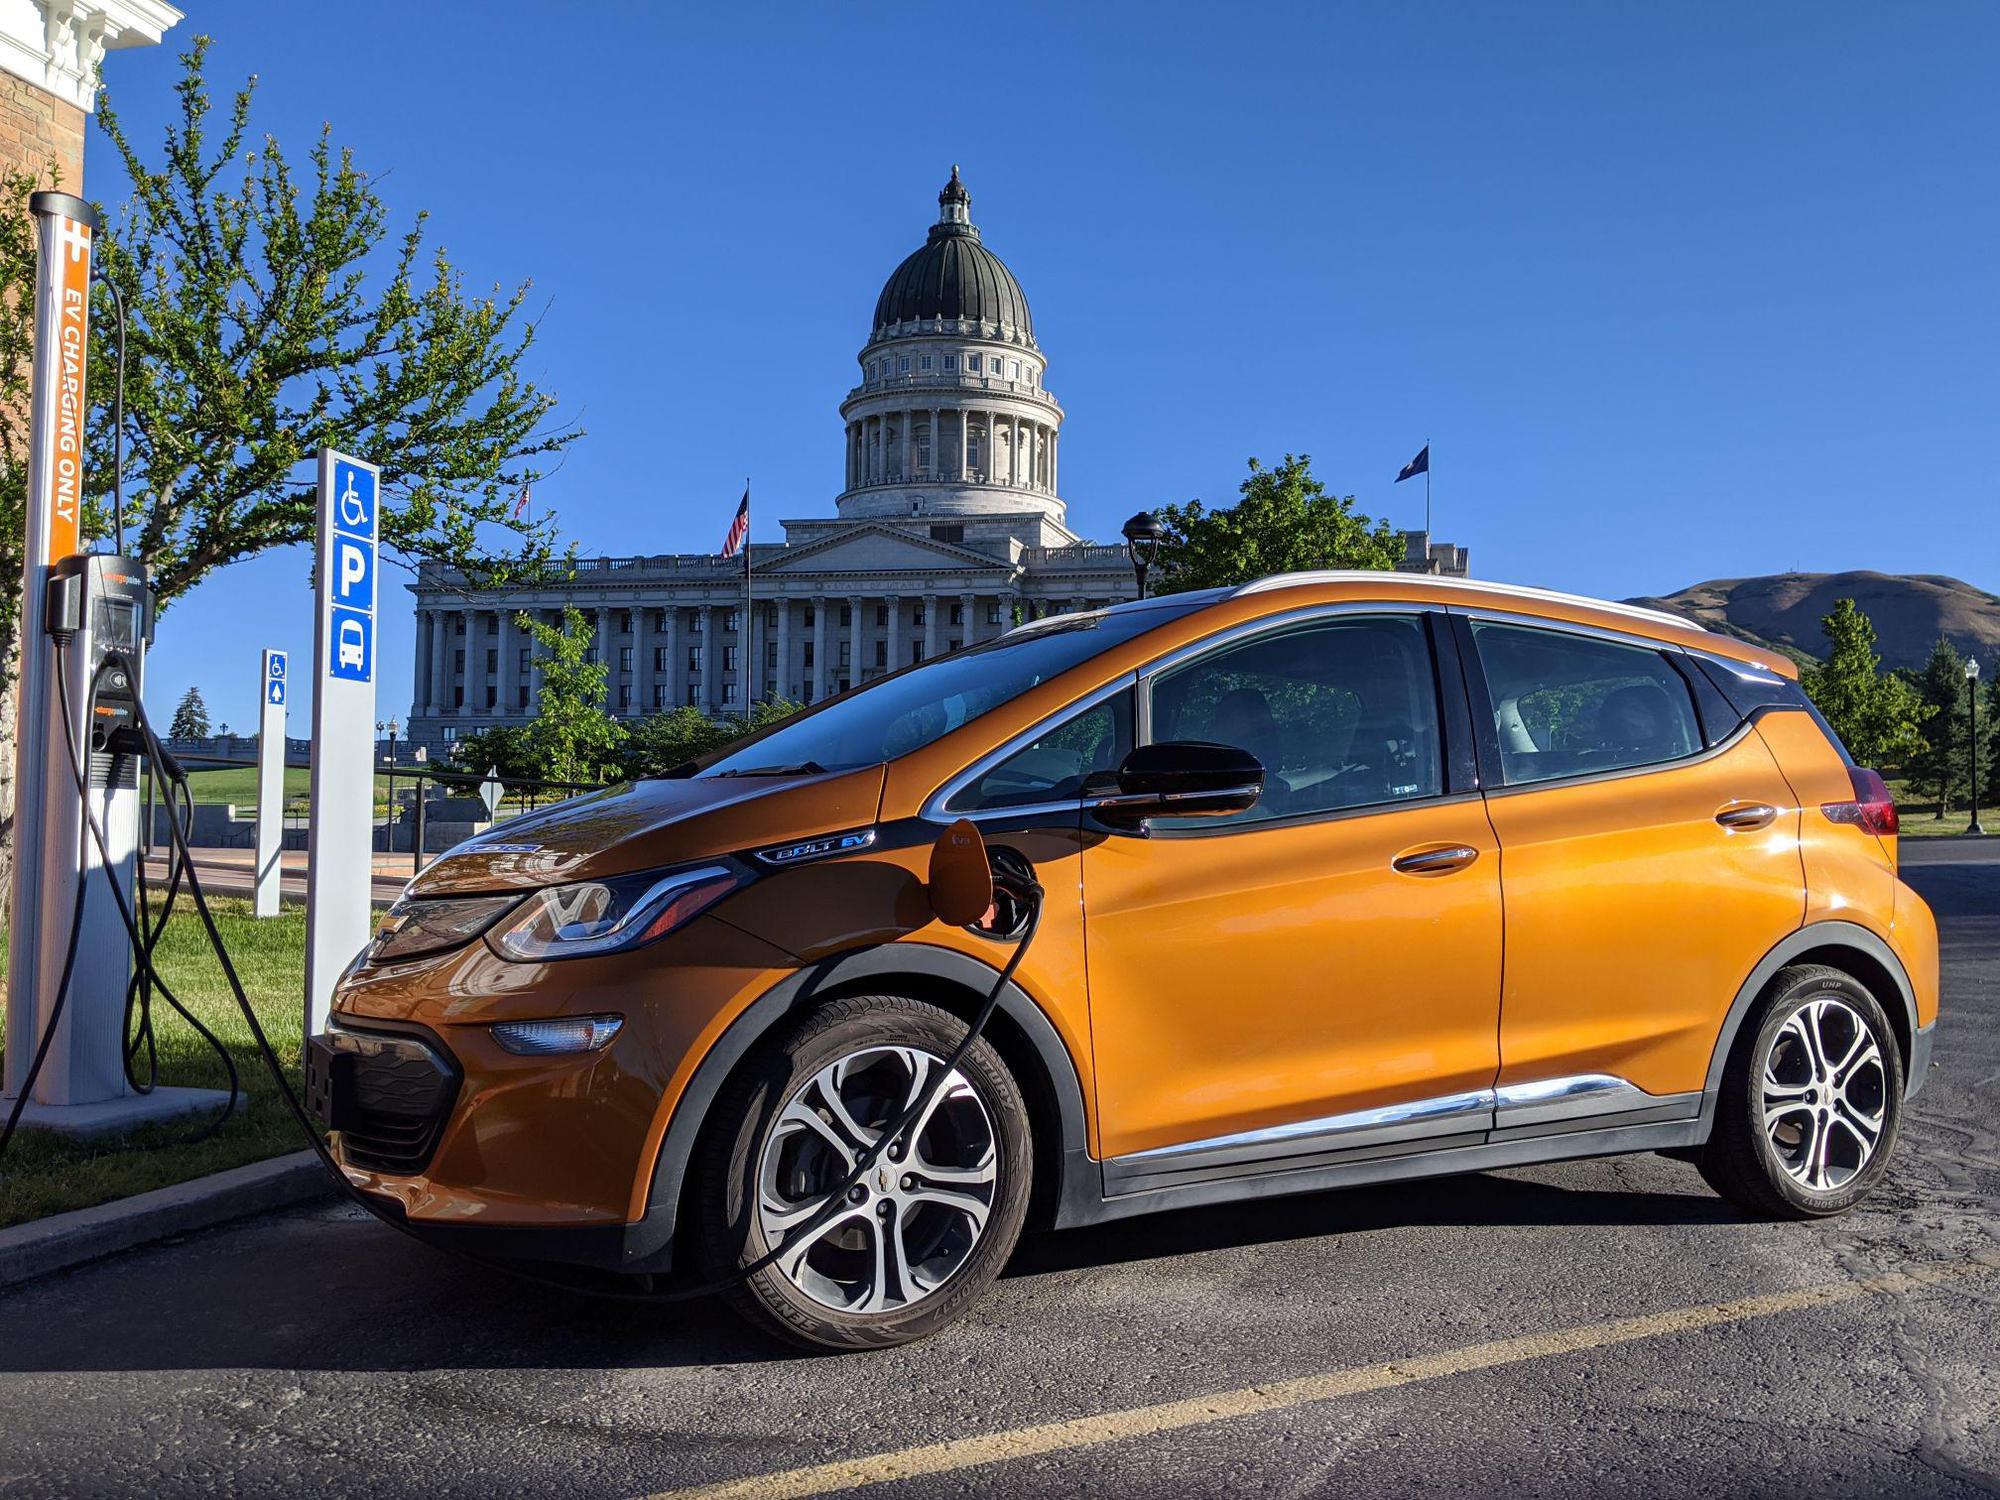 Vehicle at electric charging station by Utah state capitol